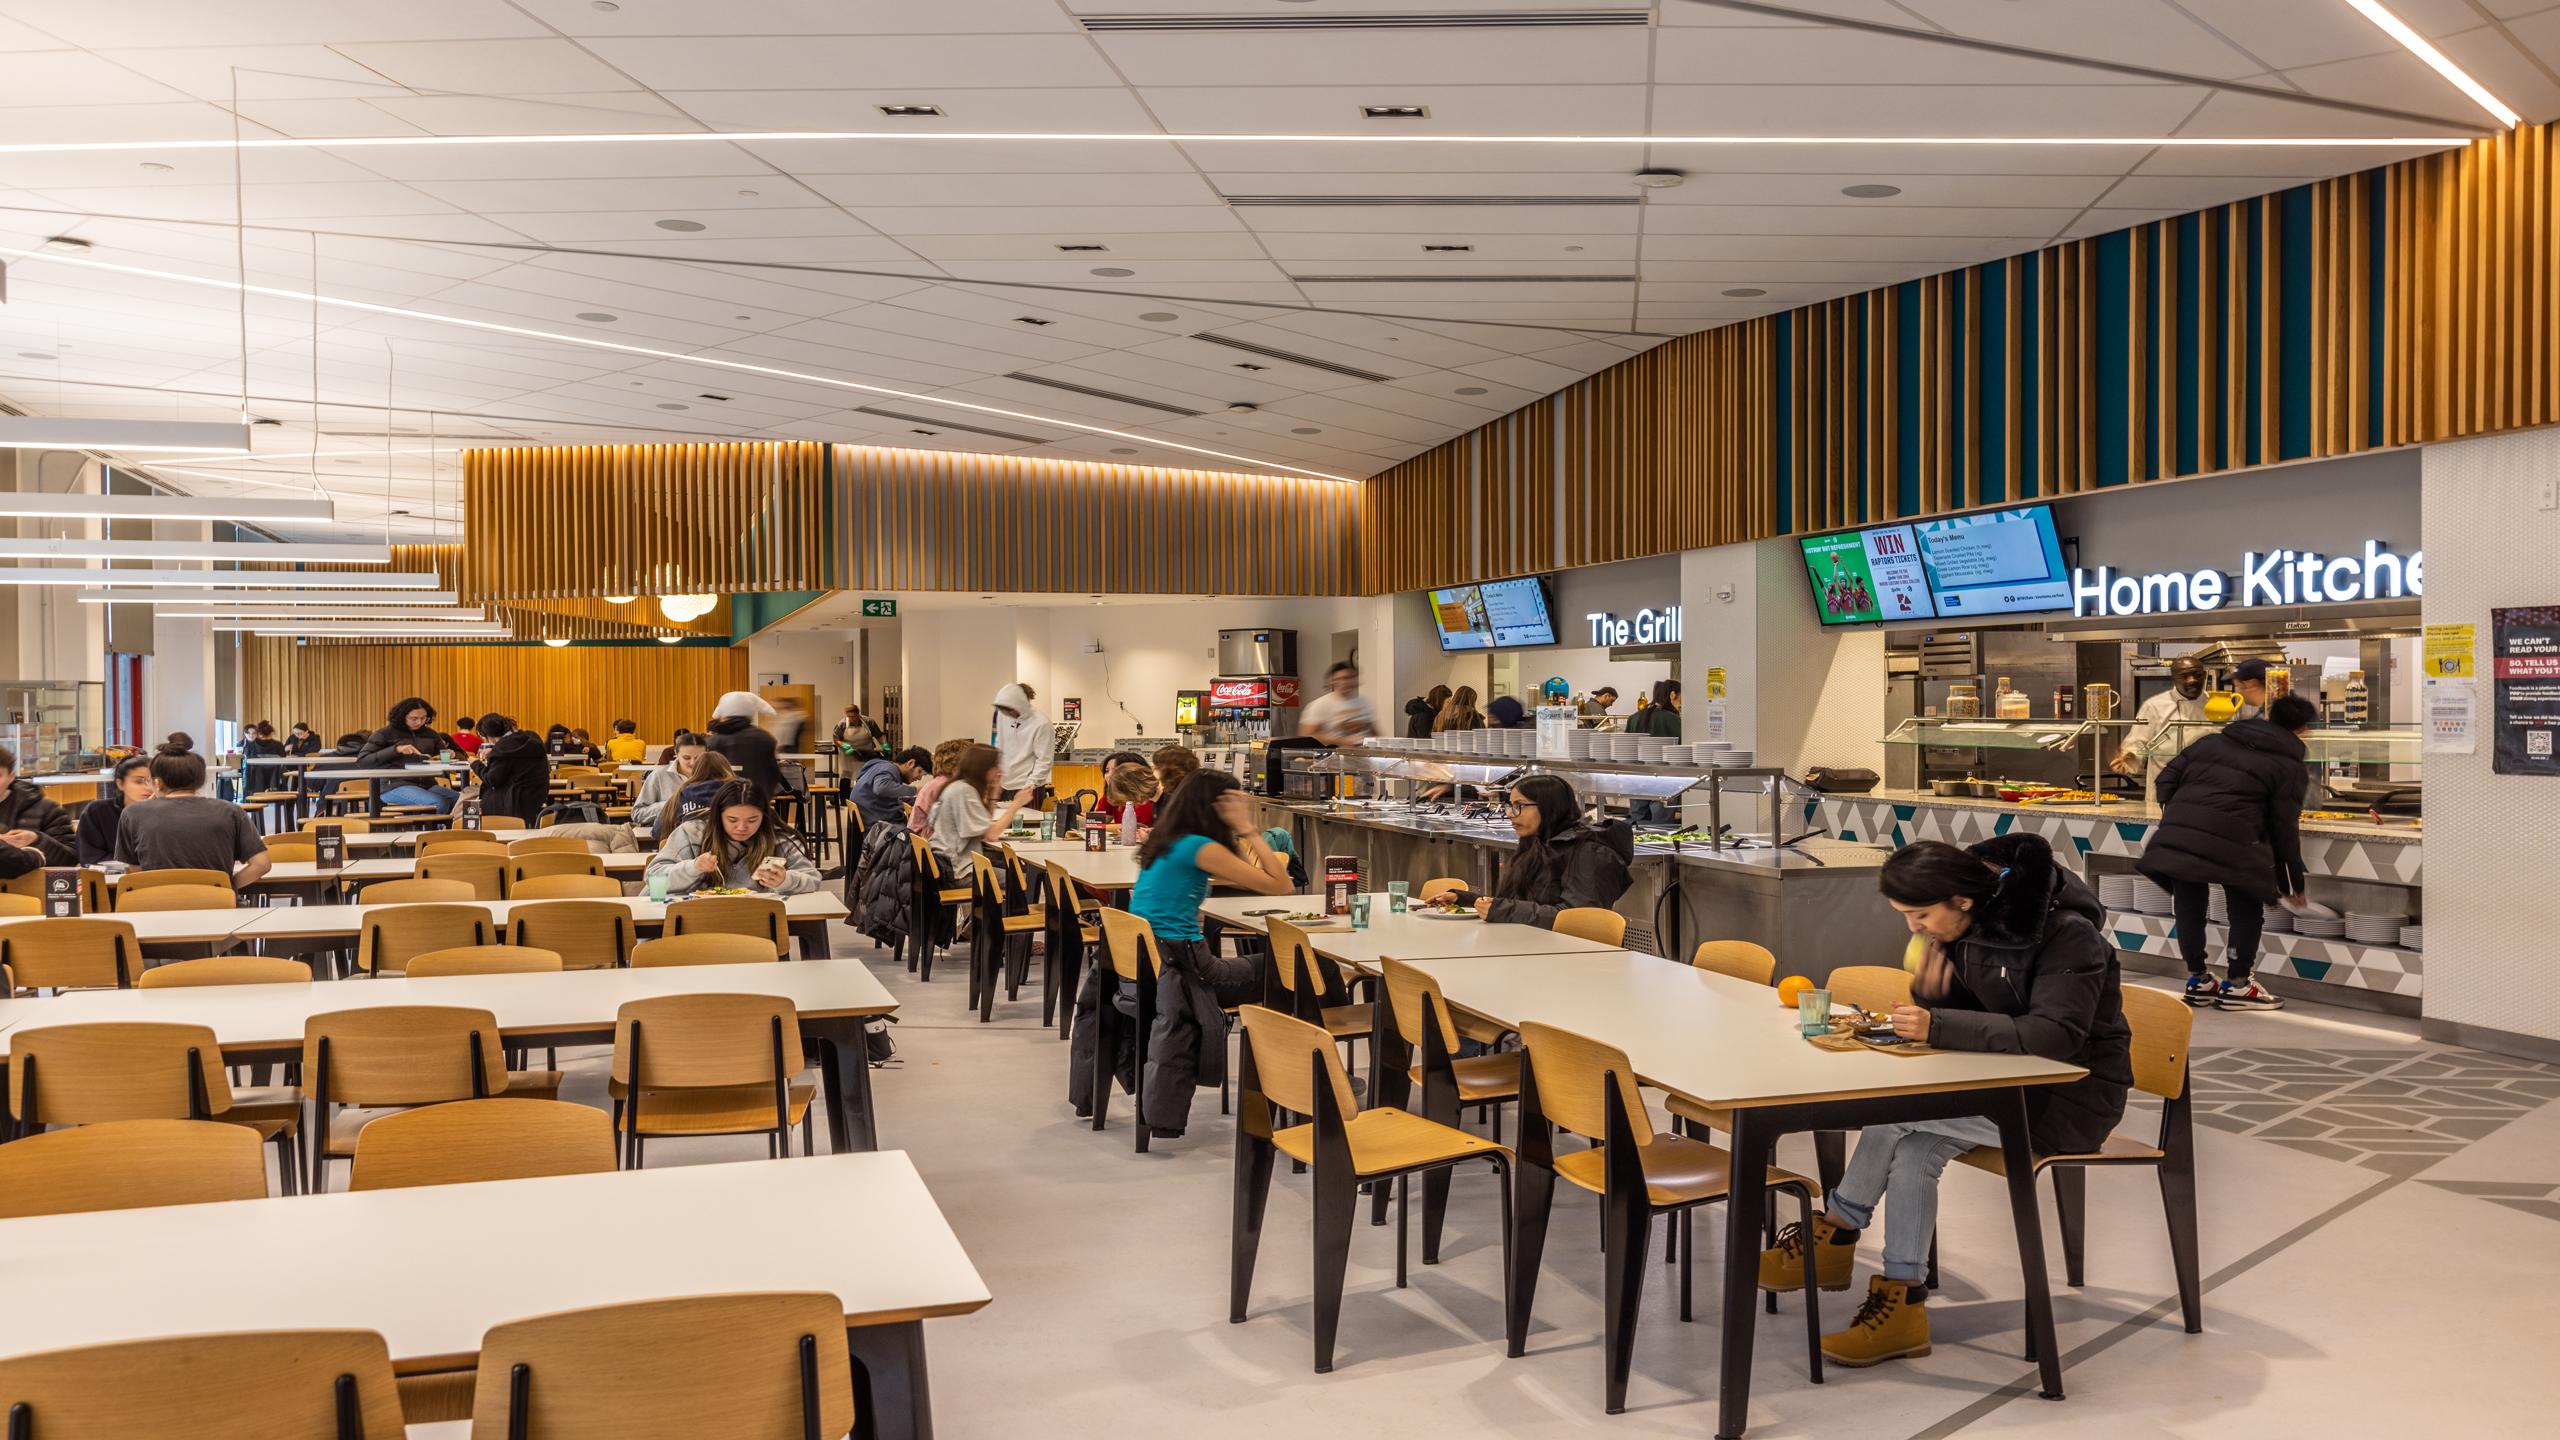 Some students sit at tables in a cafeteria eating while others stand ordering food at a counter